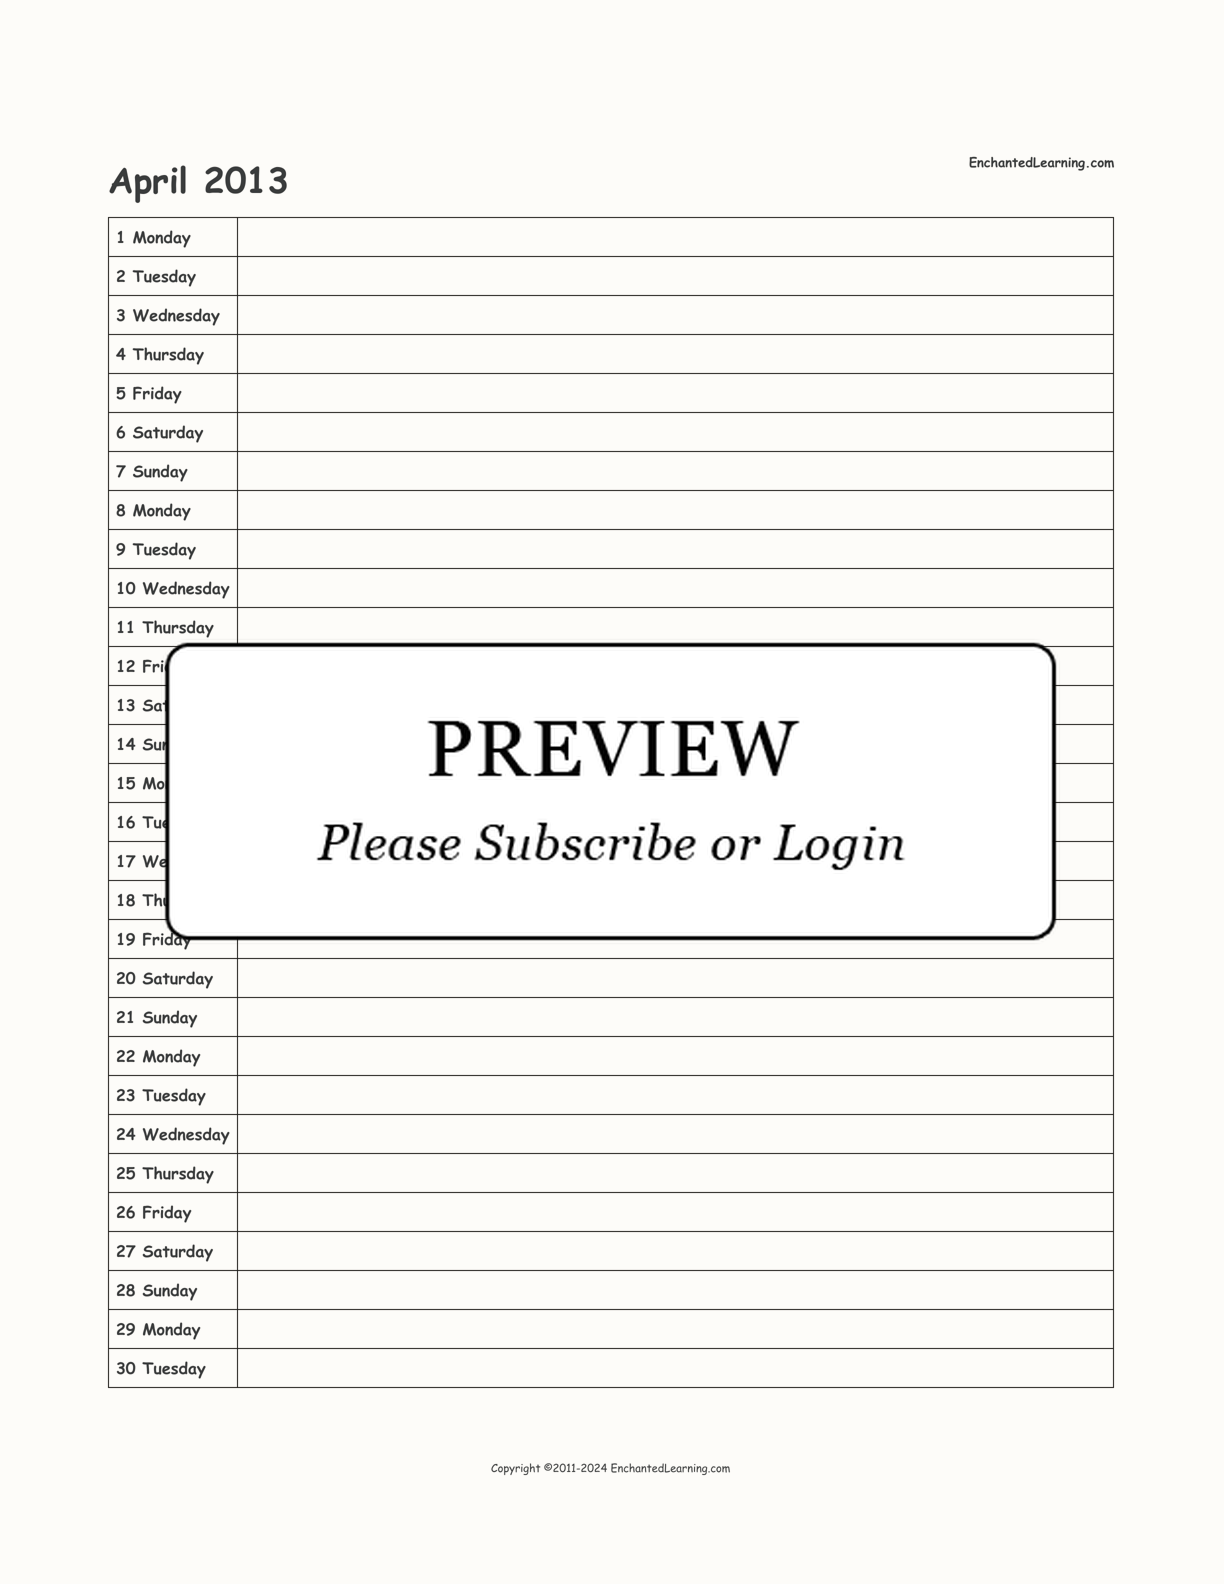 2013 Scheduling Calendar interactive printout page 4